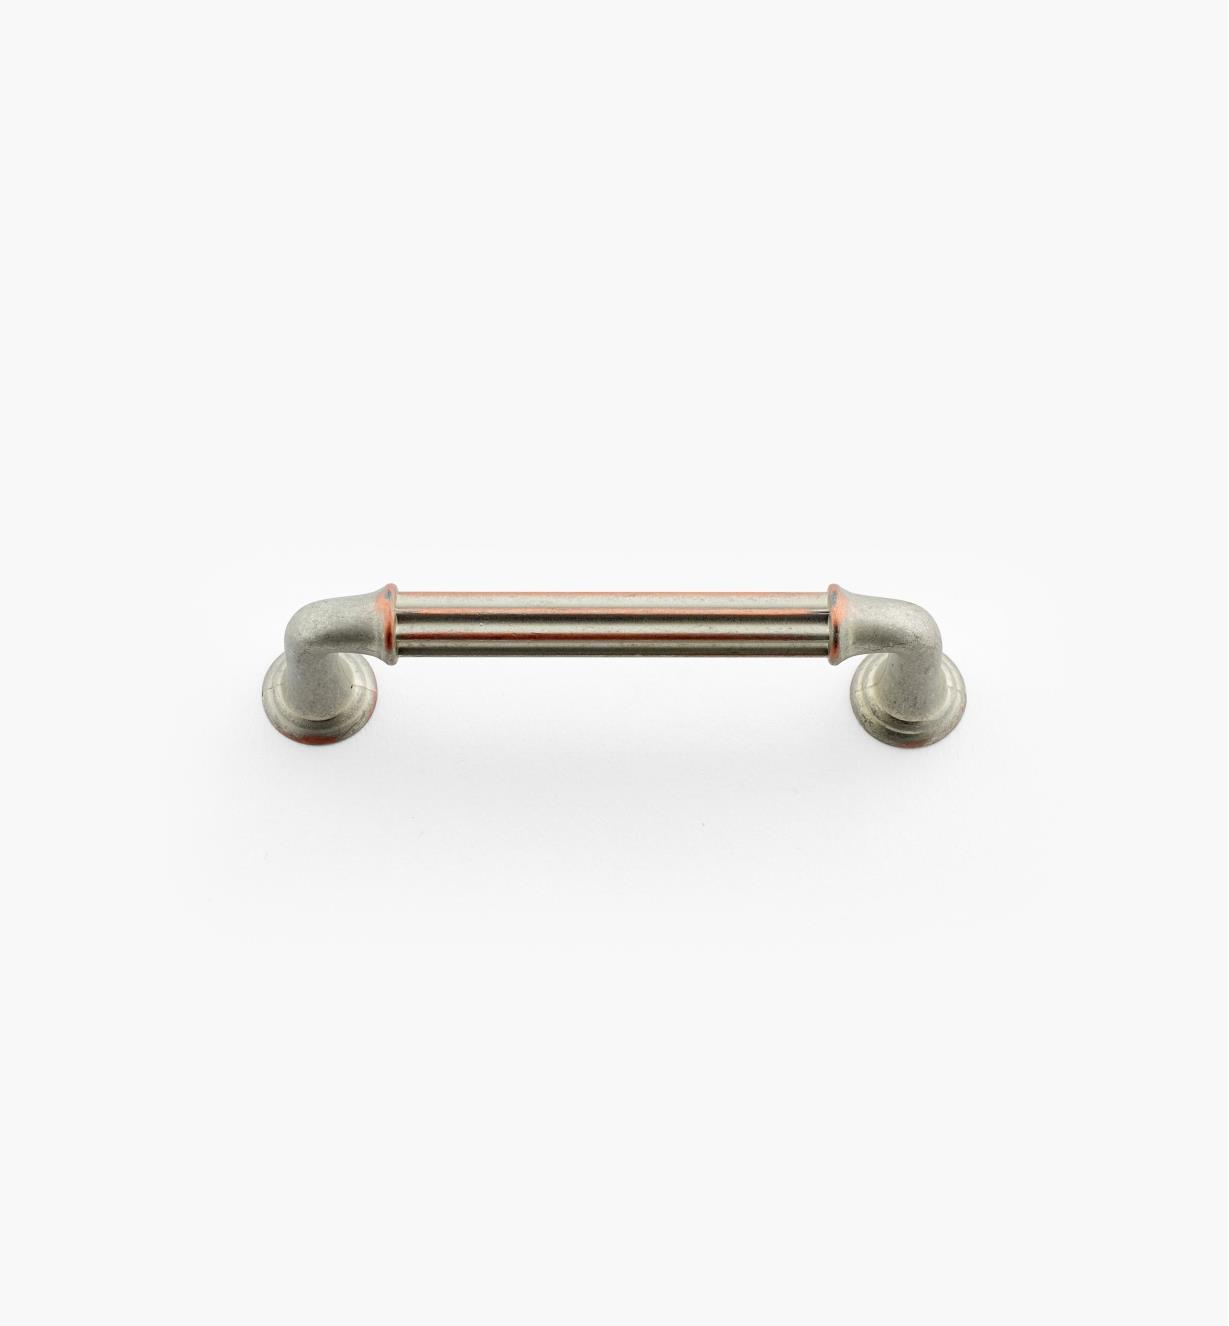 02A4591 - 3" Weathered Nickel-Copper Handle